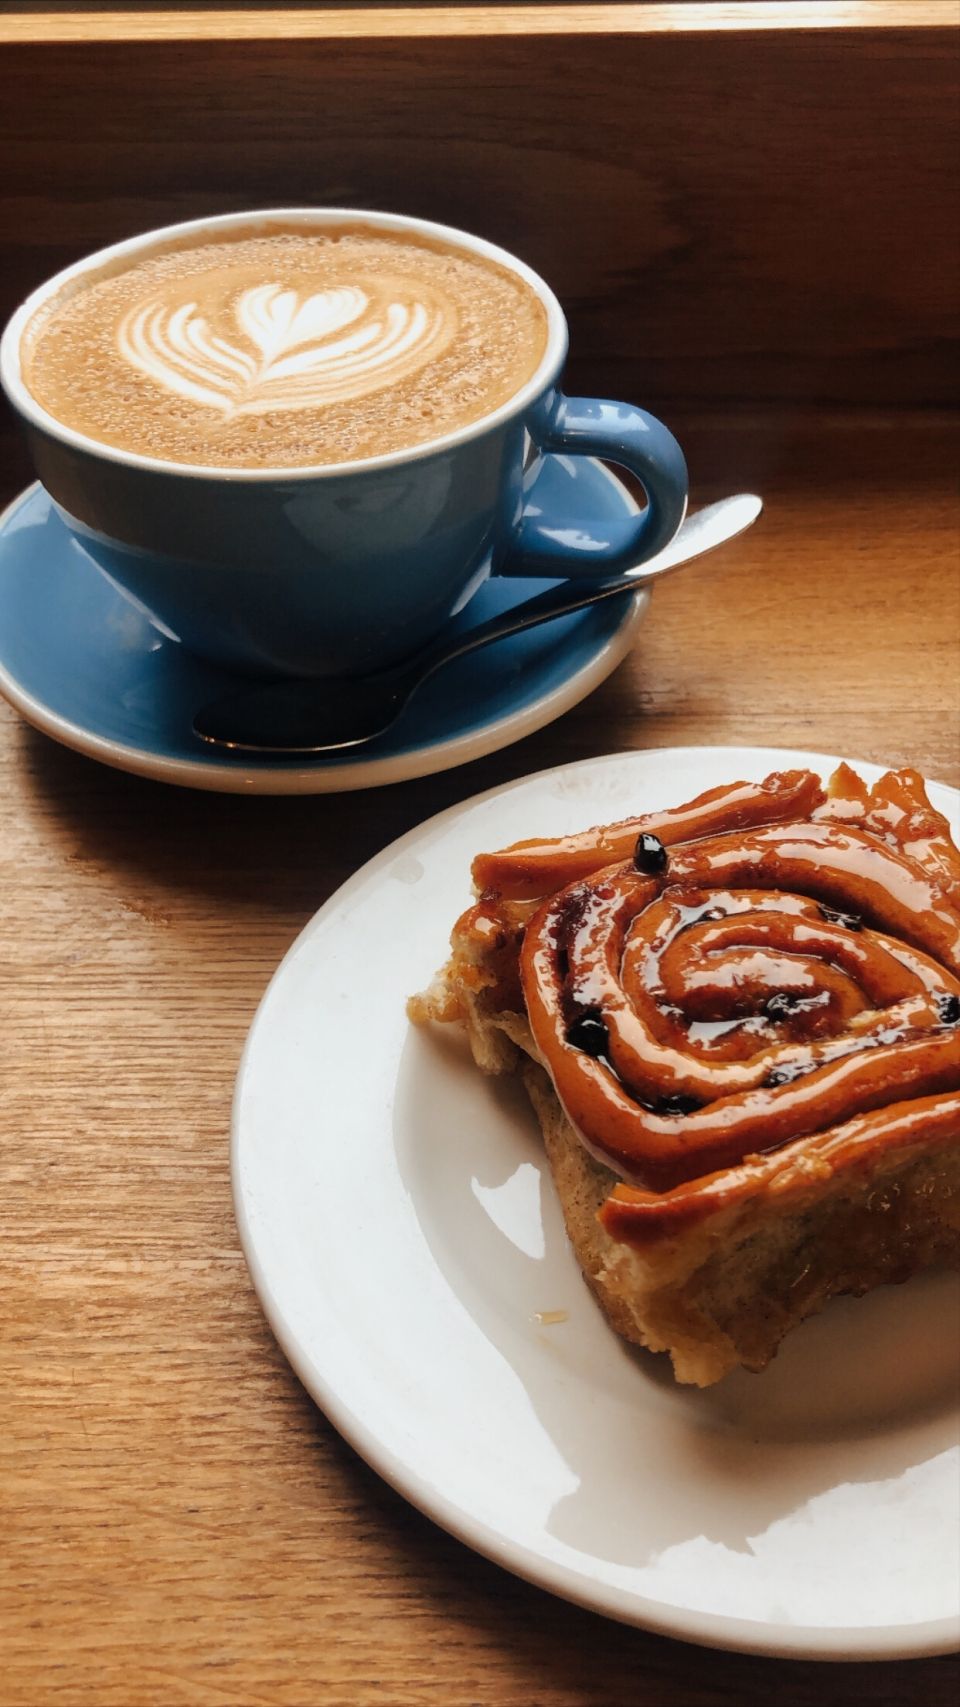 Chelsea Bun and Latte from Fitzbillies! 